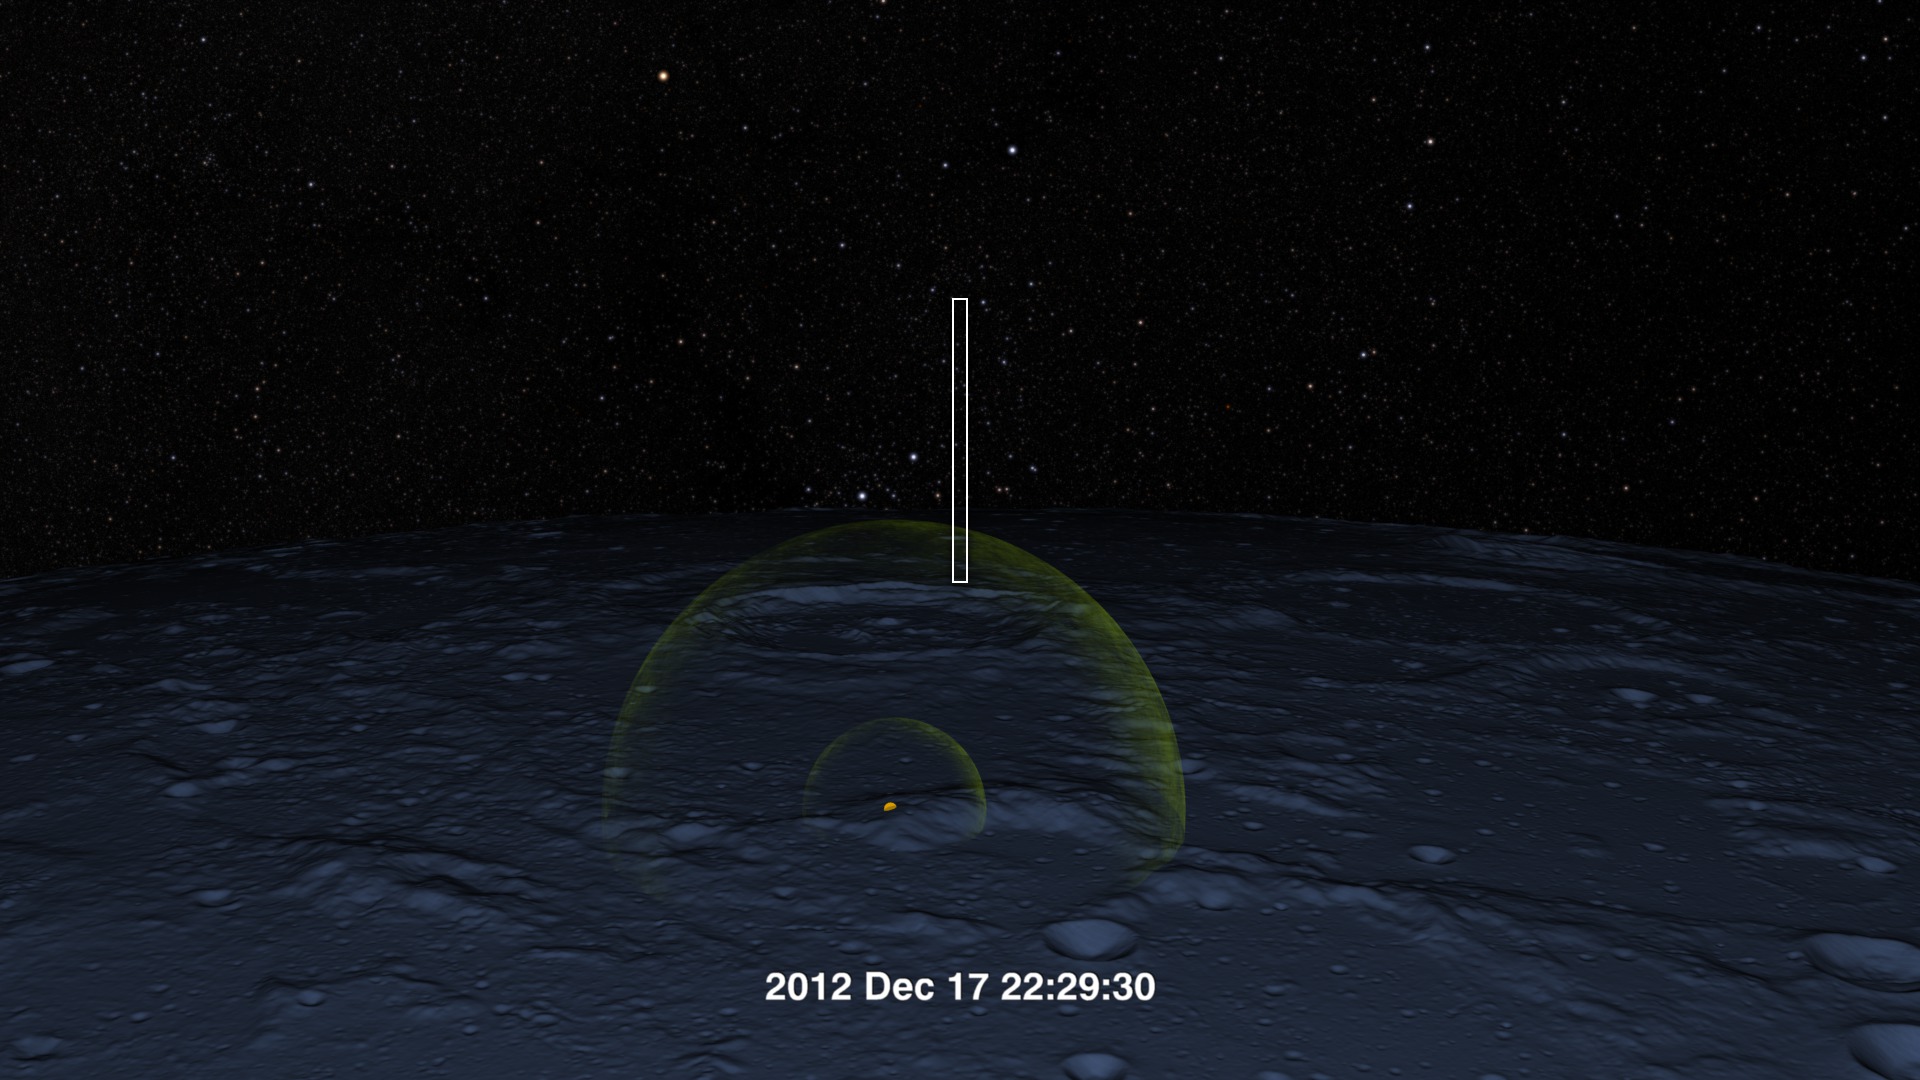 LRO flies over the north pole of the Moon, where it has a very good view of the GRAIL impact. The second part is the view from LRO through LAMP's slit, showing the impact and the resulting plume. The orbits, impact locations, terrain, LAMP field of view, and starfield are accurately rendered.